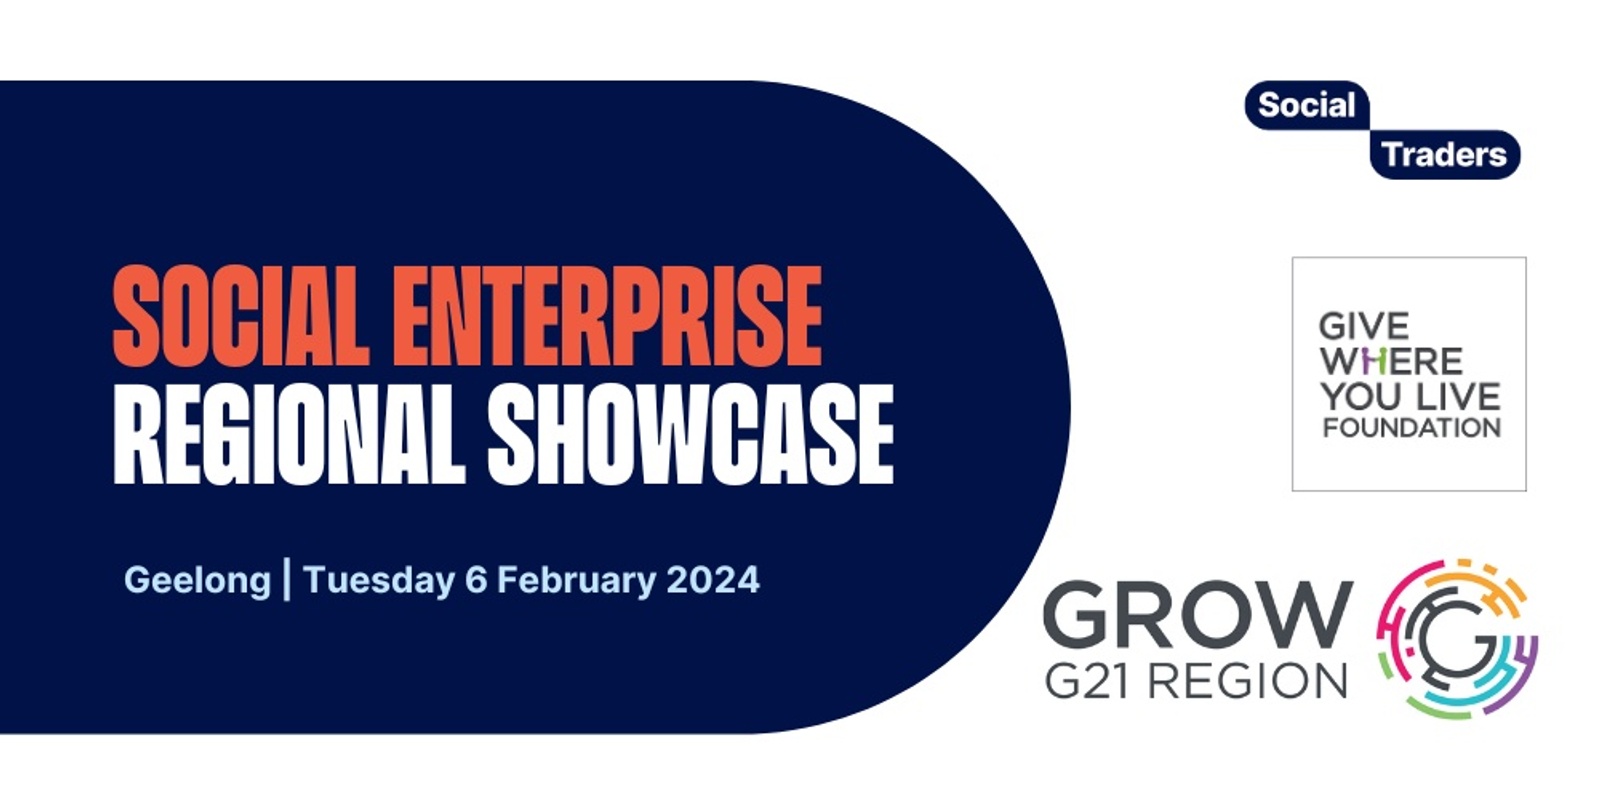 Banner image for VIC Regional Showcase | Social Enterprise in Geelong | Tuesday 6 February 2024